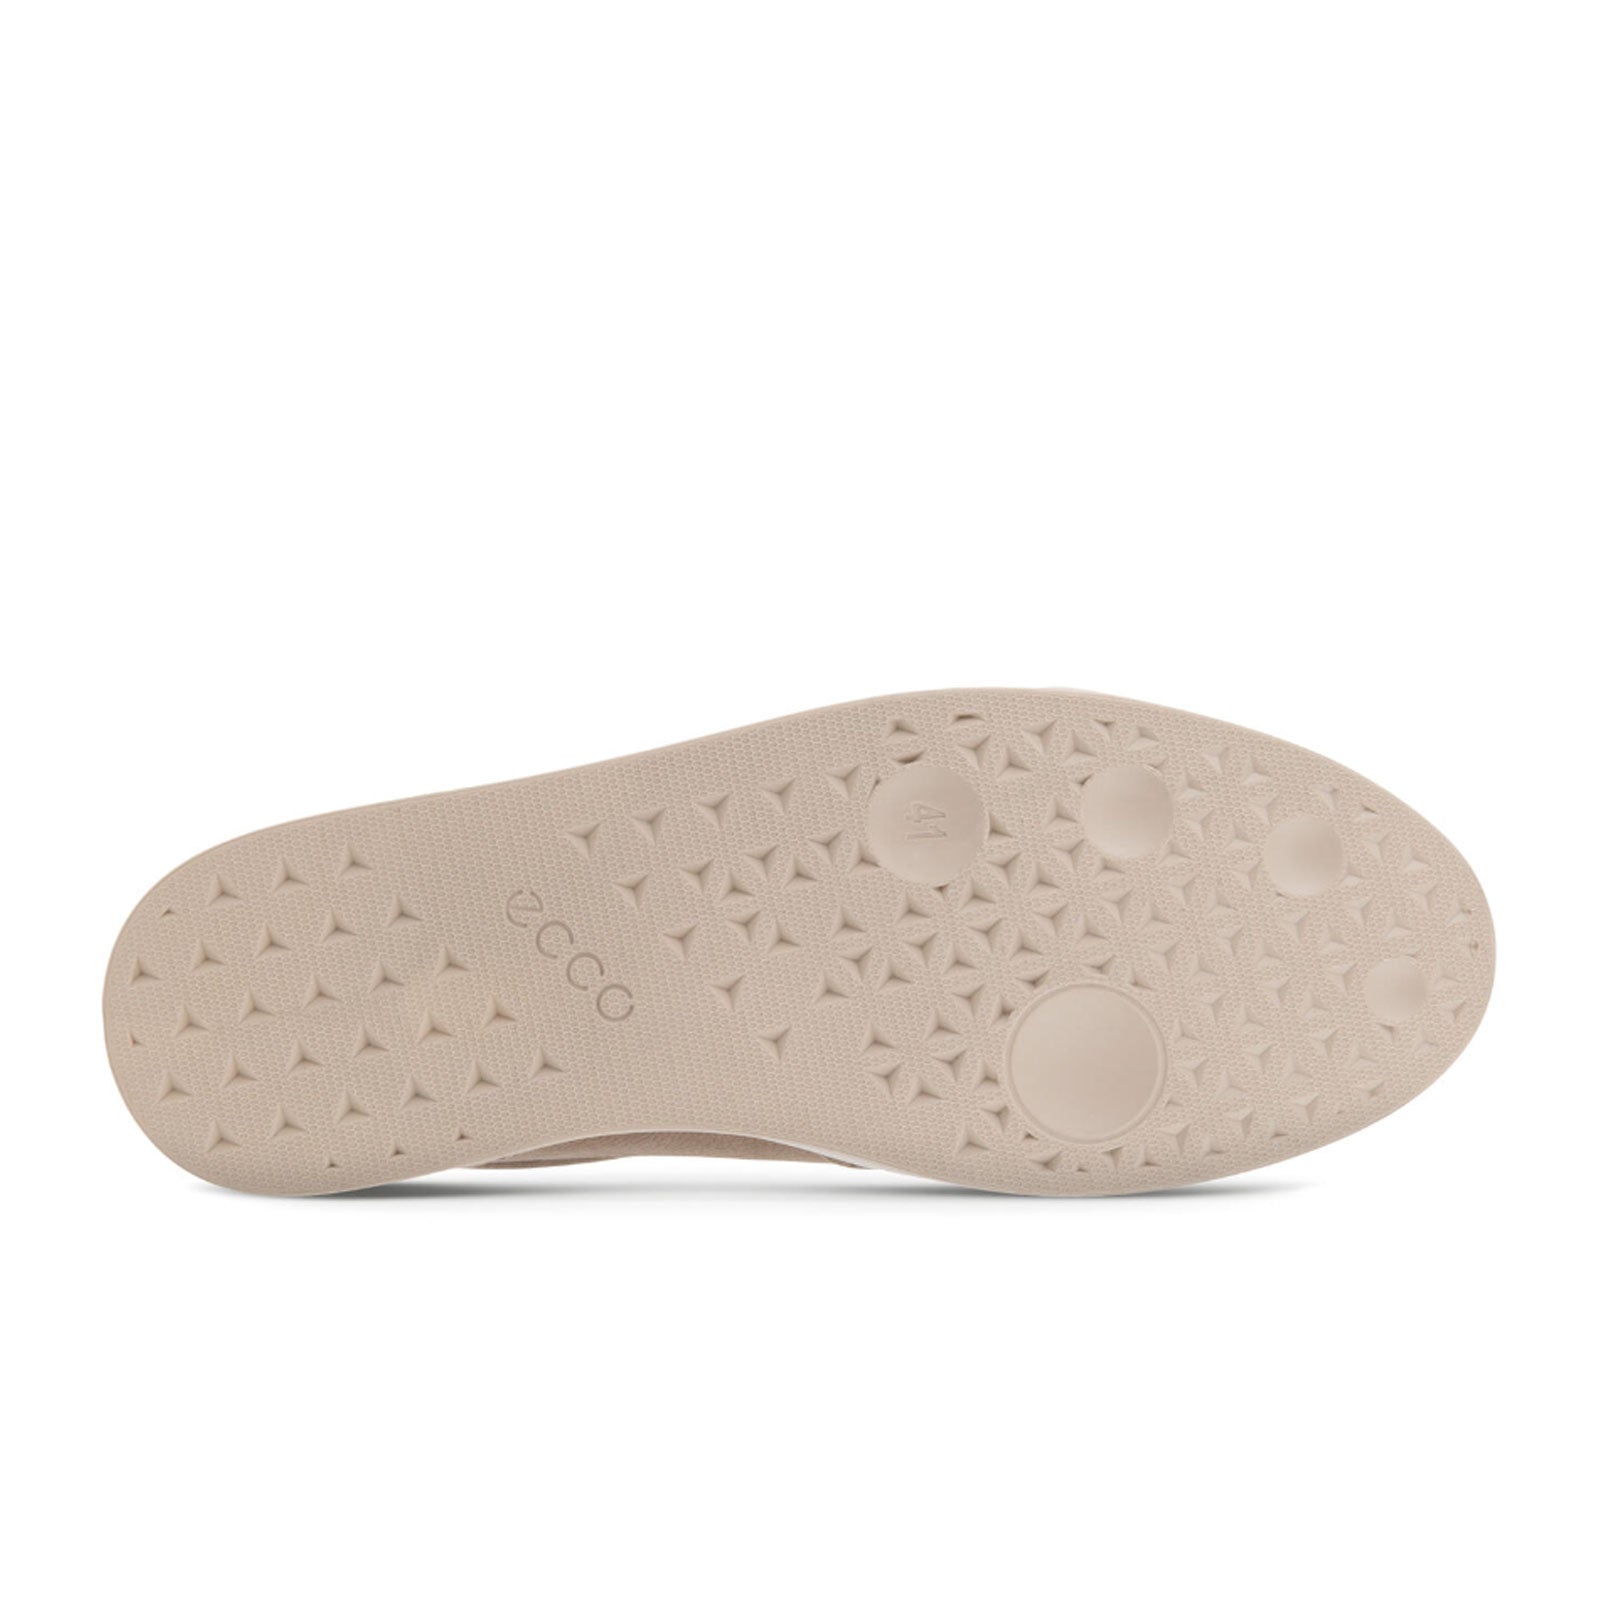 Ecco Street Slip On (Men) - Taupe/Taupe The Shoe Fitters